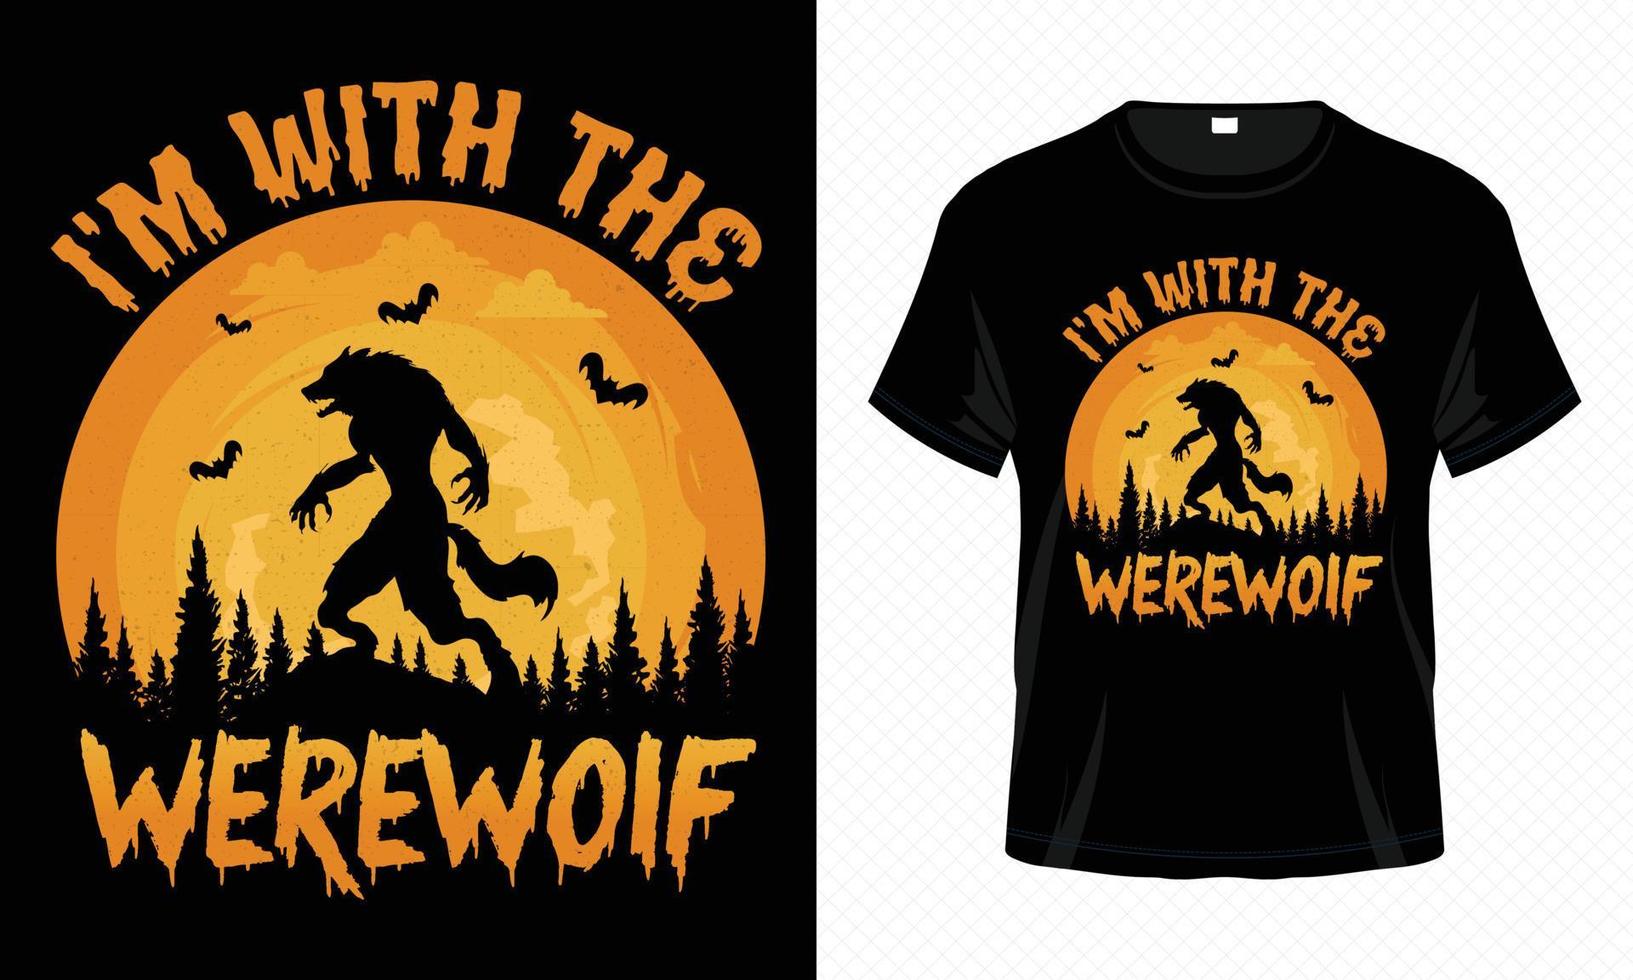 I'm With The Werewolf - Happy Halloween t-shirt design vector template. Werewolf t-shirt design for Halloween day. Printable Halloween vector design of werewolf, bat, moon and scary night.